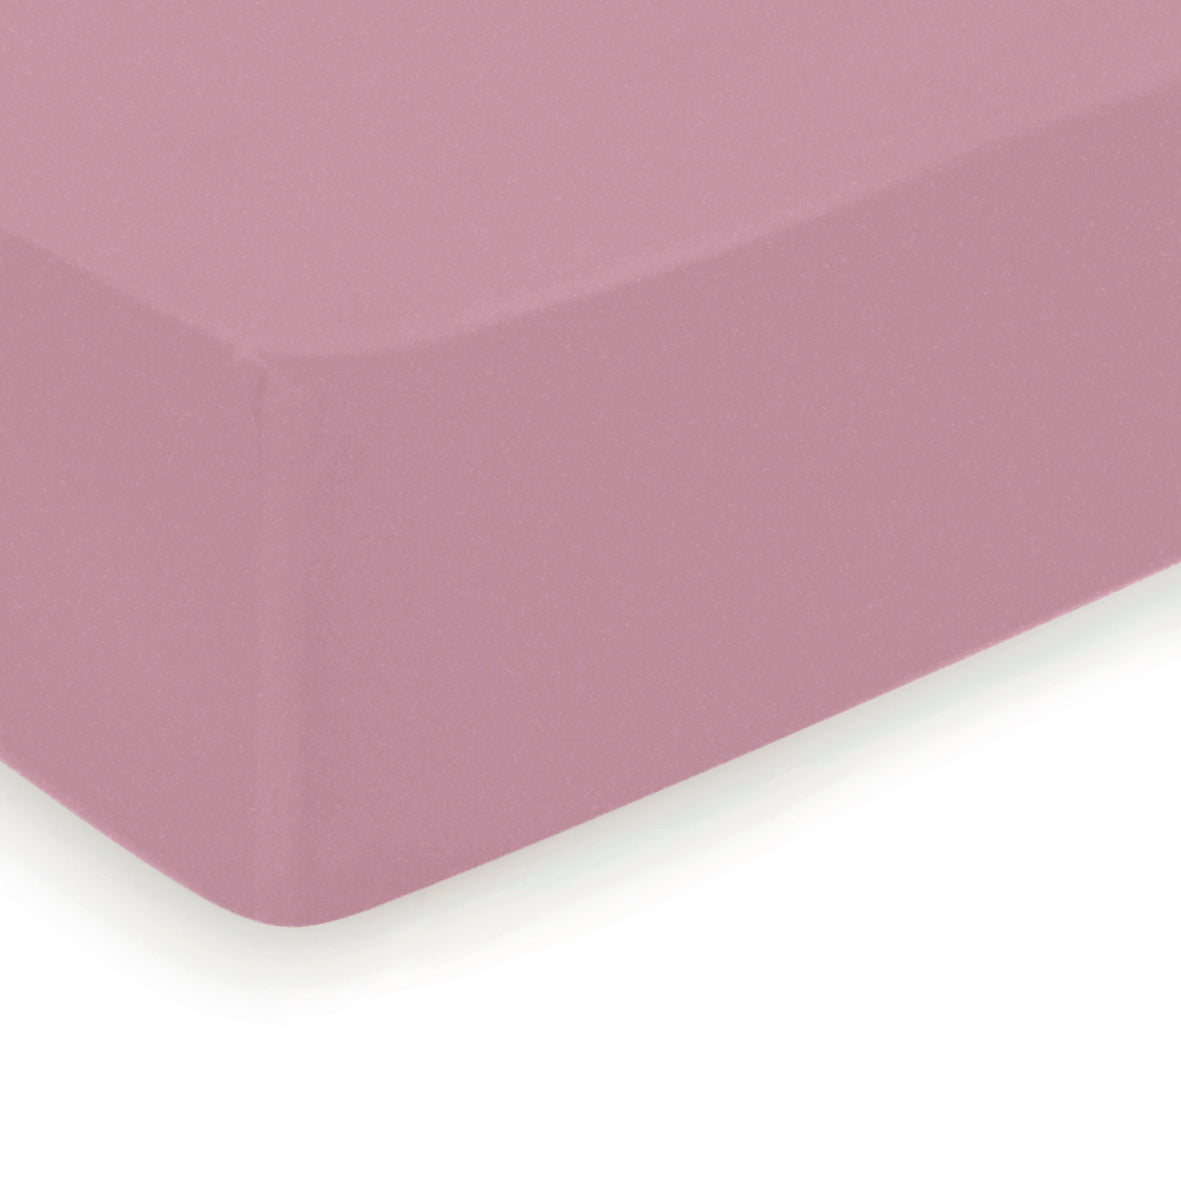 Fitted sheet - 100% cotton satin - Pink